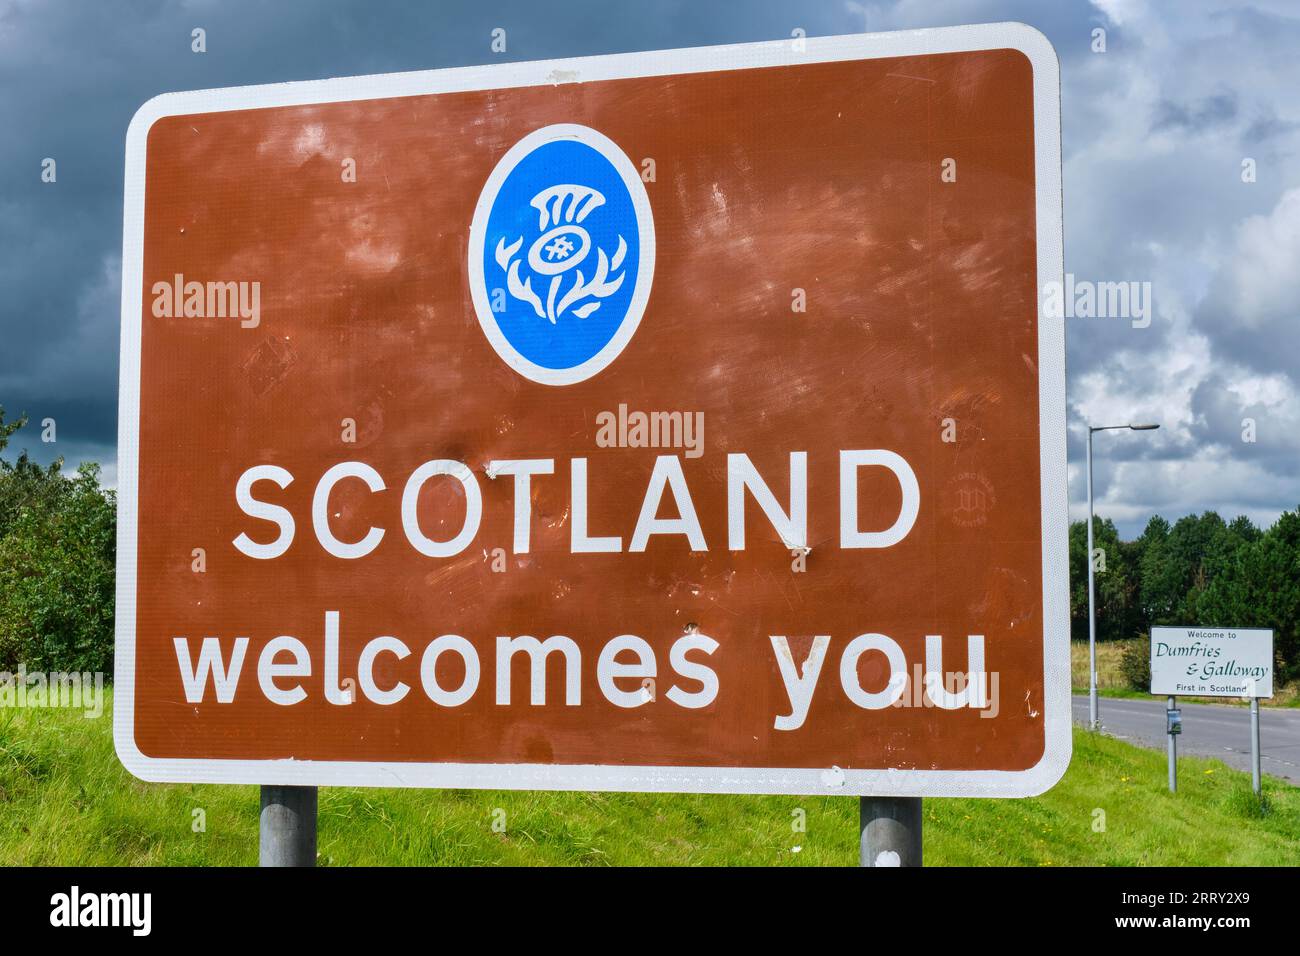 Scotland Welcomes You sign at Gretna Green, Dumfries and Galloway, Scotland Stock Photo